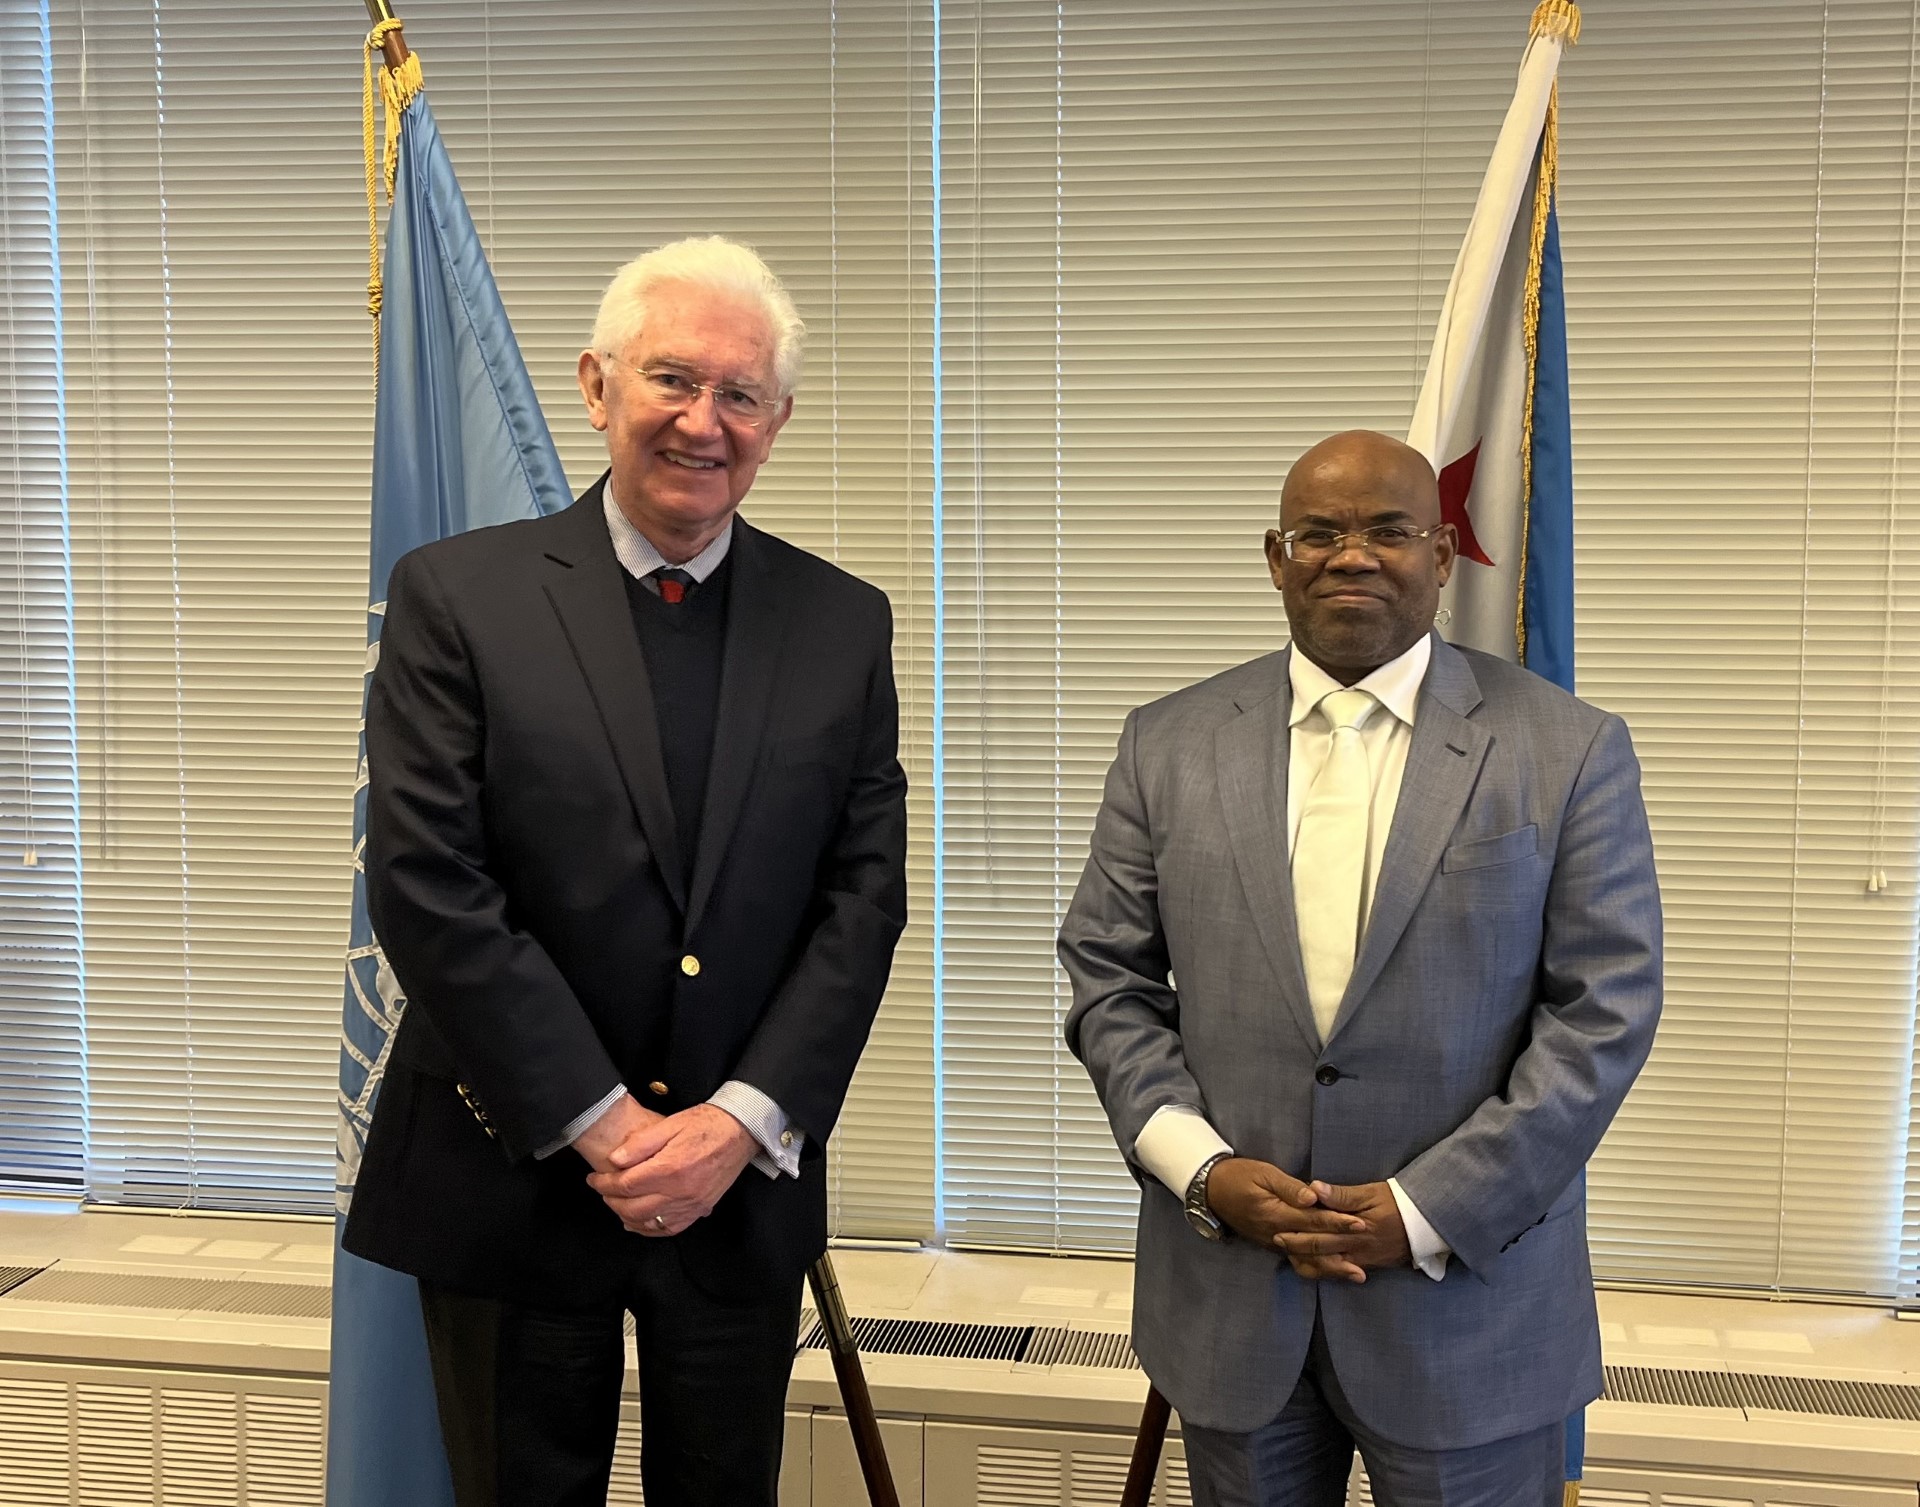 H. E. Ambassador Paul Beresford-Hill met with H.E. Ambassador Mohamed Siad Doualeh, the Permanent Representative of the Republic of Djibouti to the United Nations